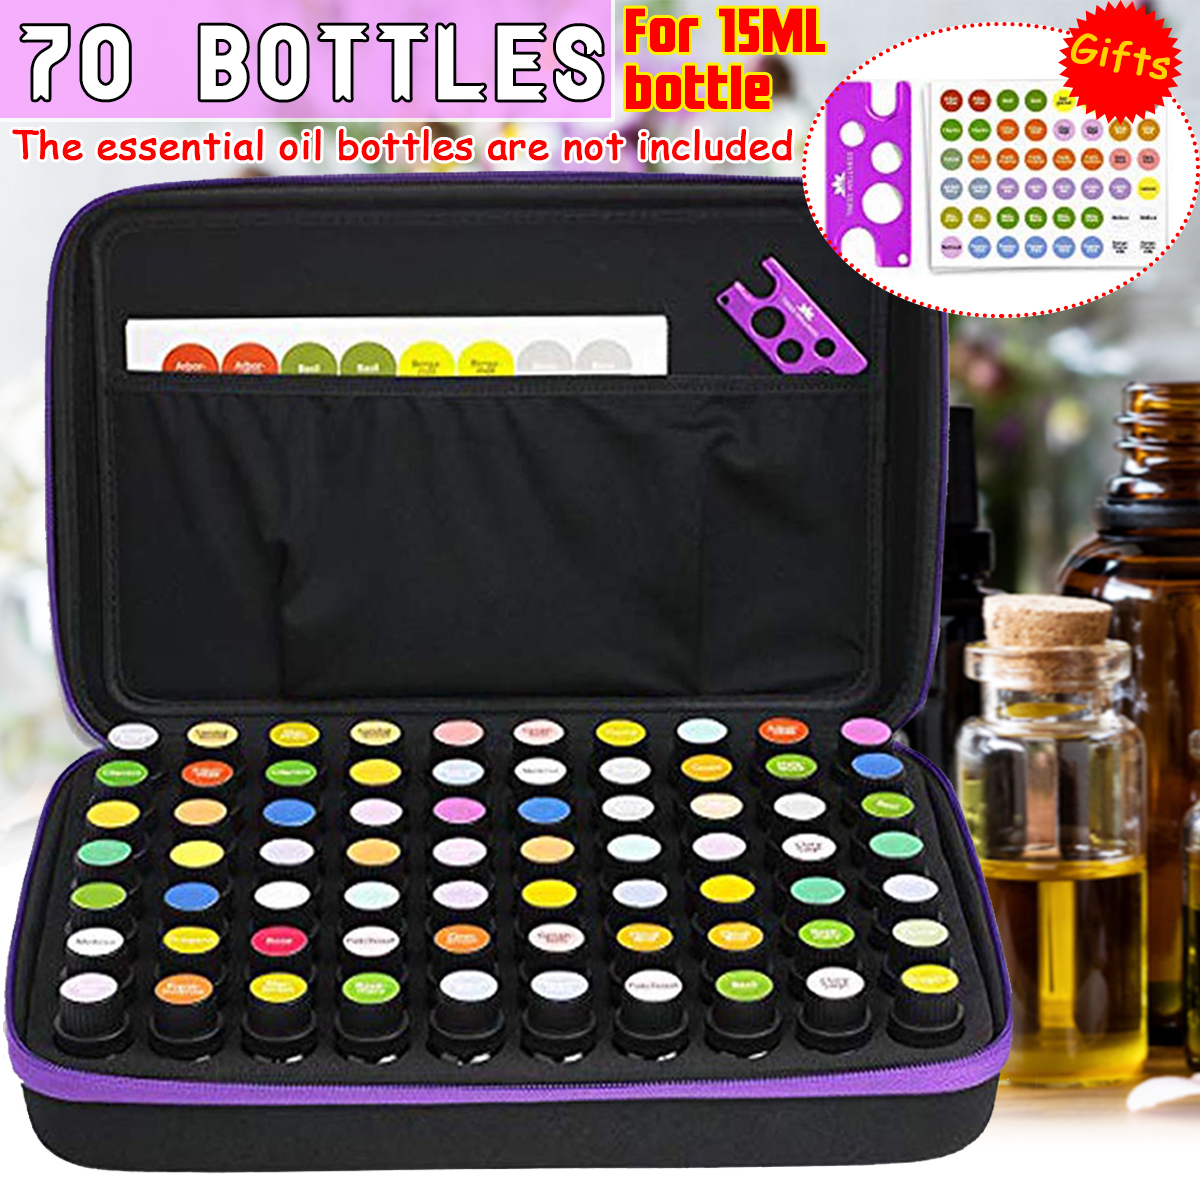 70-Bottles-15ml-Essential-Oil-Carrying-Storage-Case-Travel-Portable-Bag-Box-1605405-1